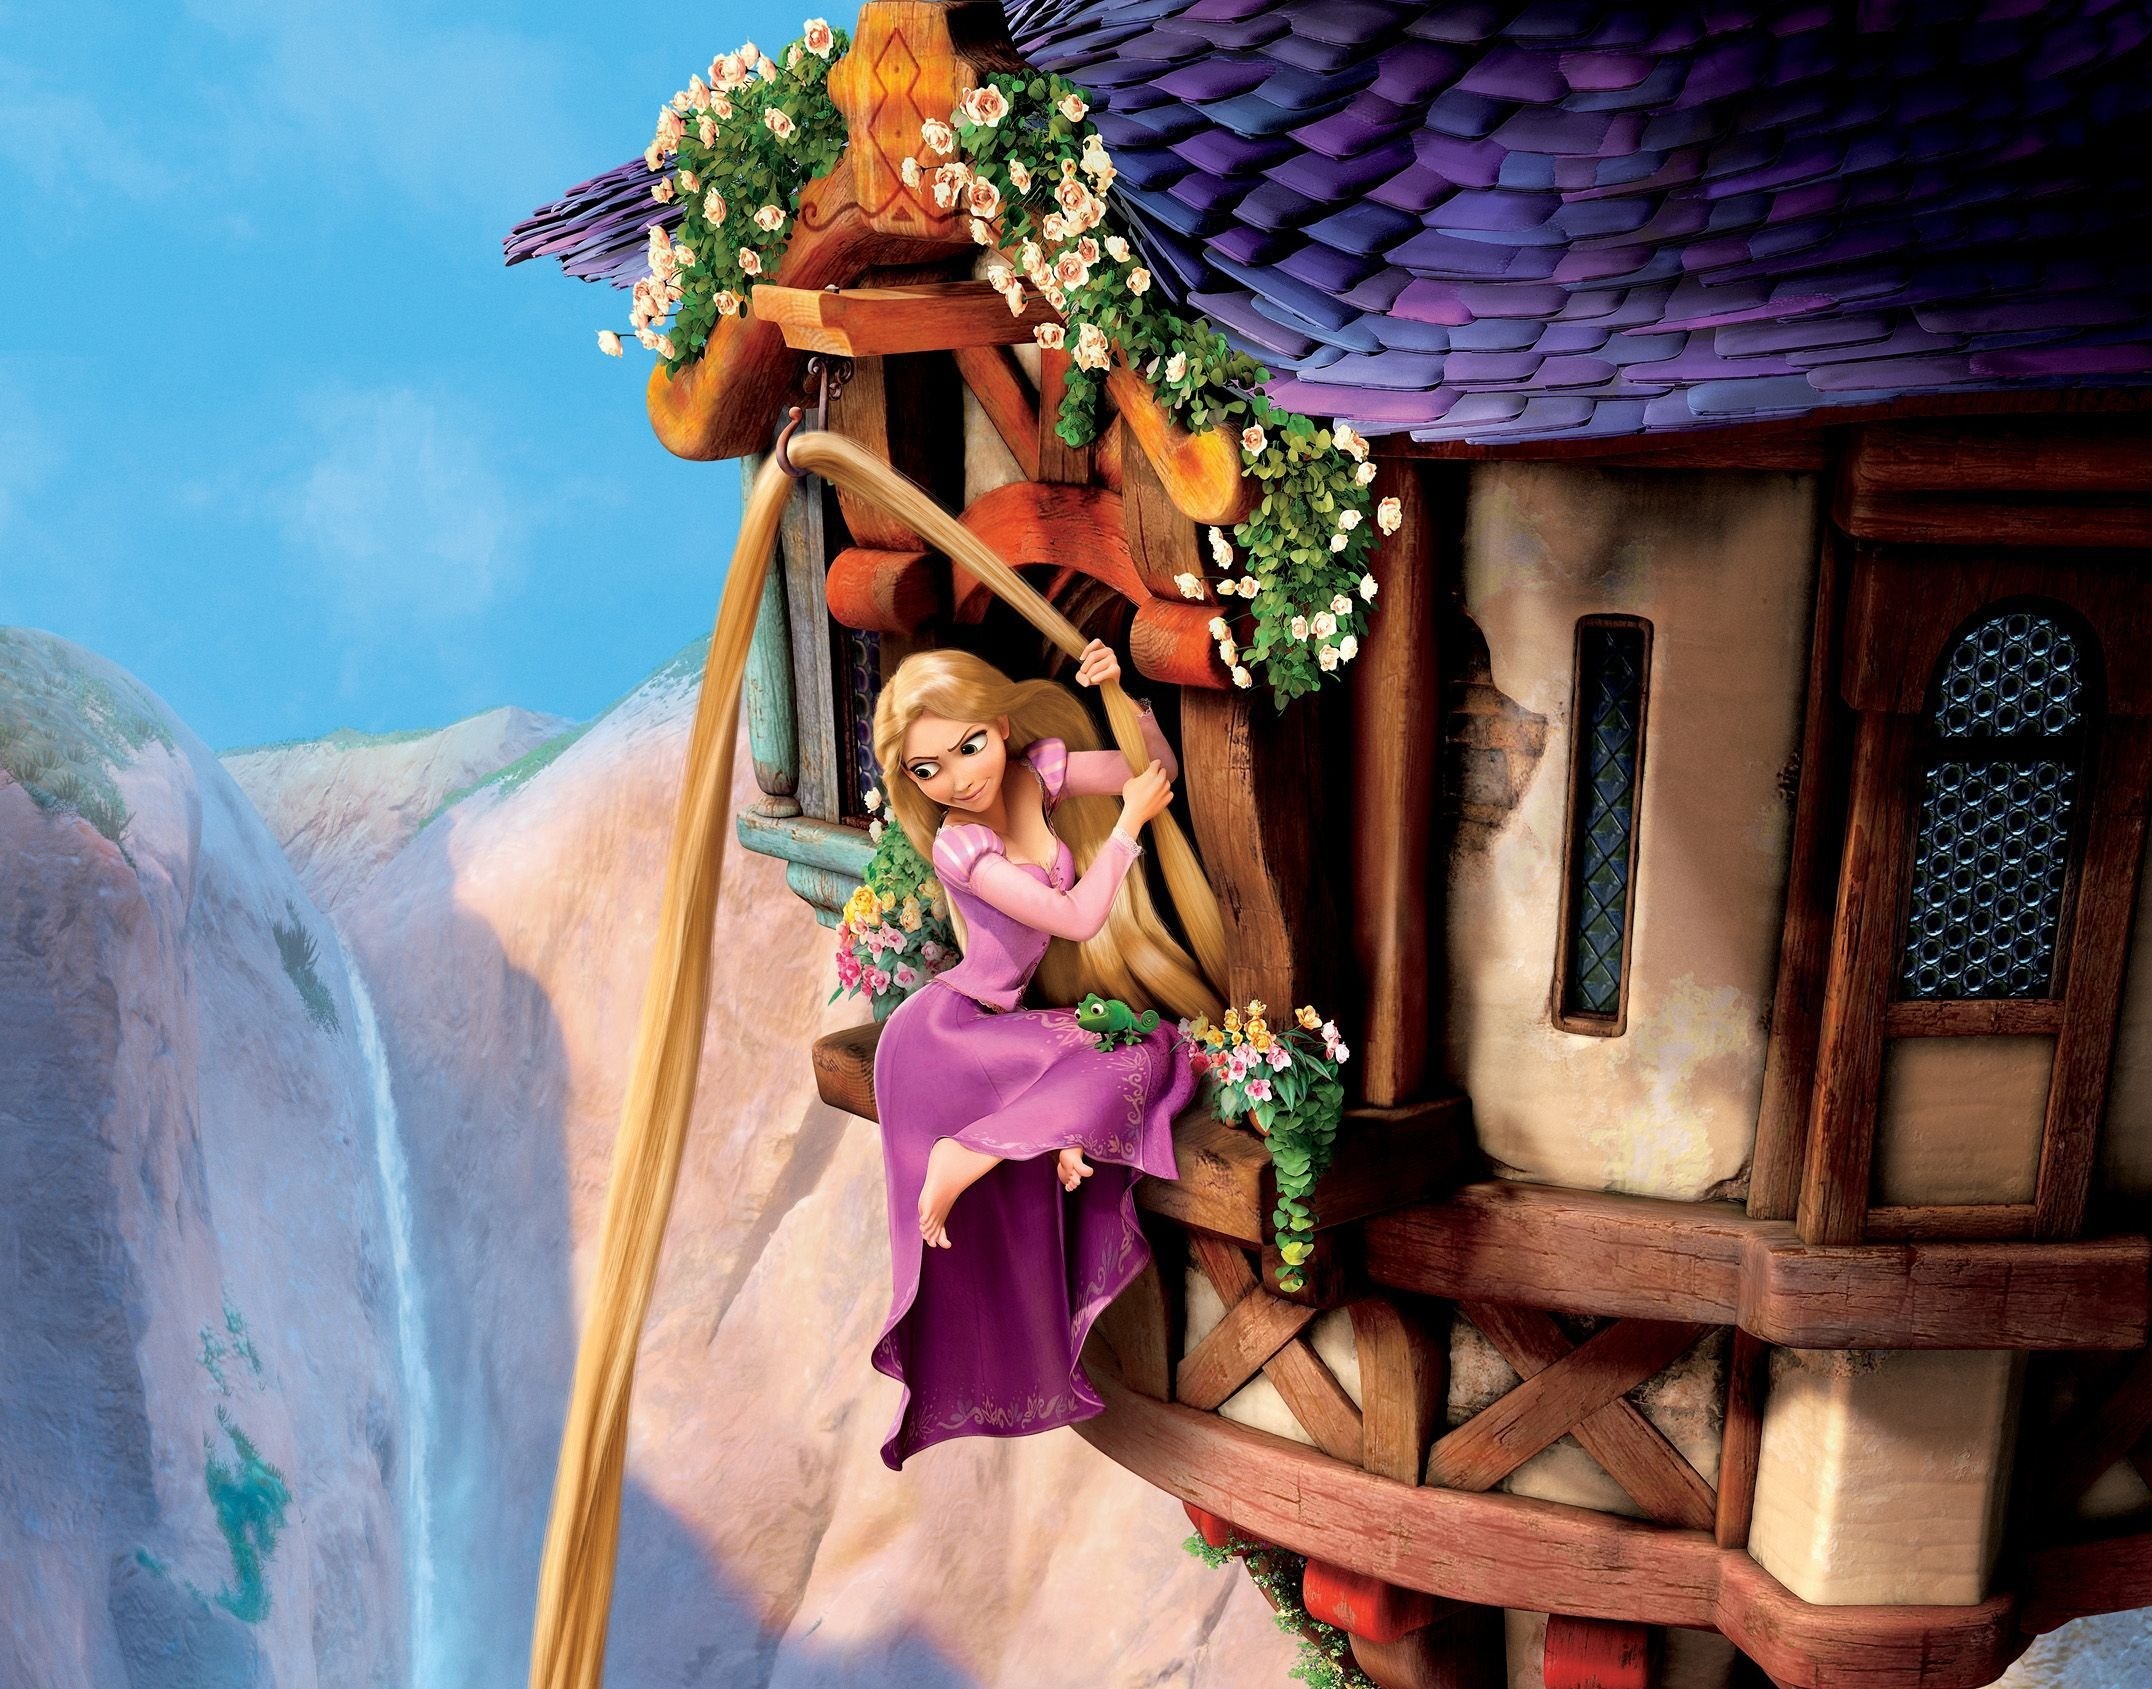 2152x1689 Related Wallpapers. Tangled, complex story, Rapunzel, Princess, Goldilocks,  castle, tower, window